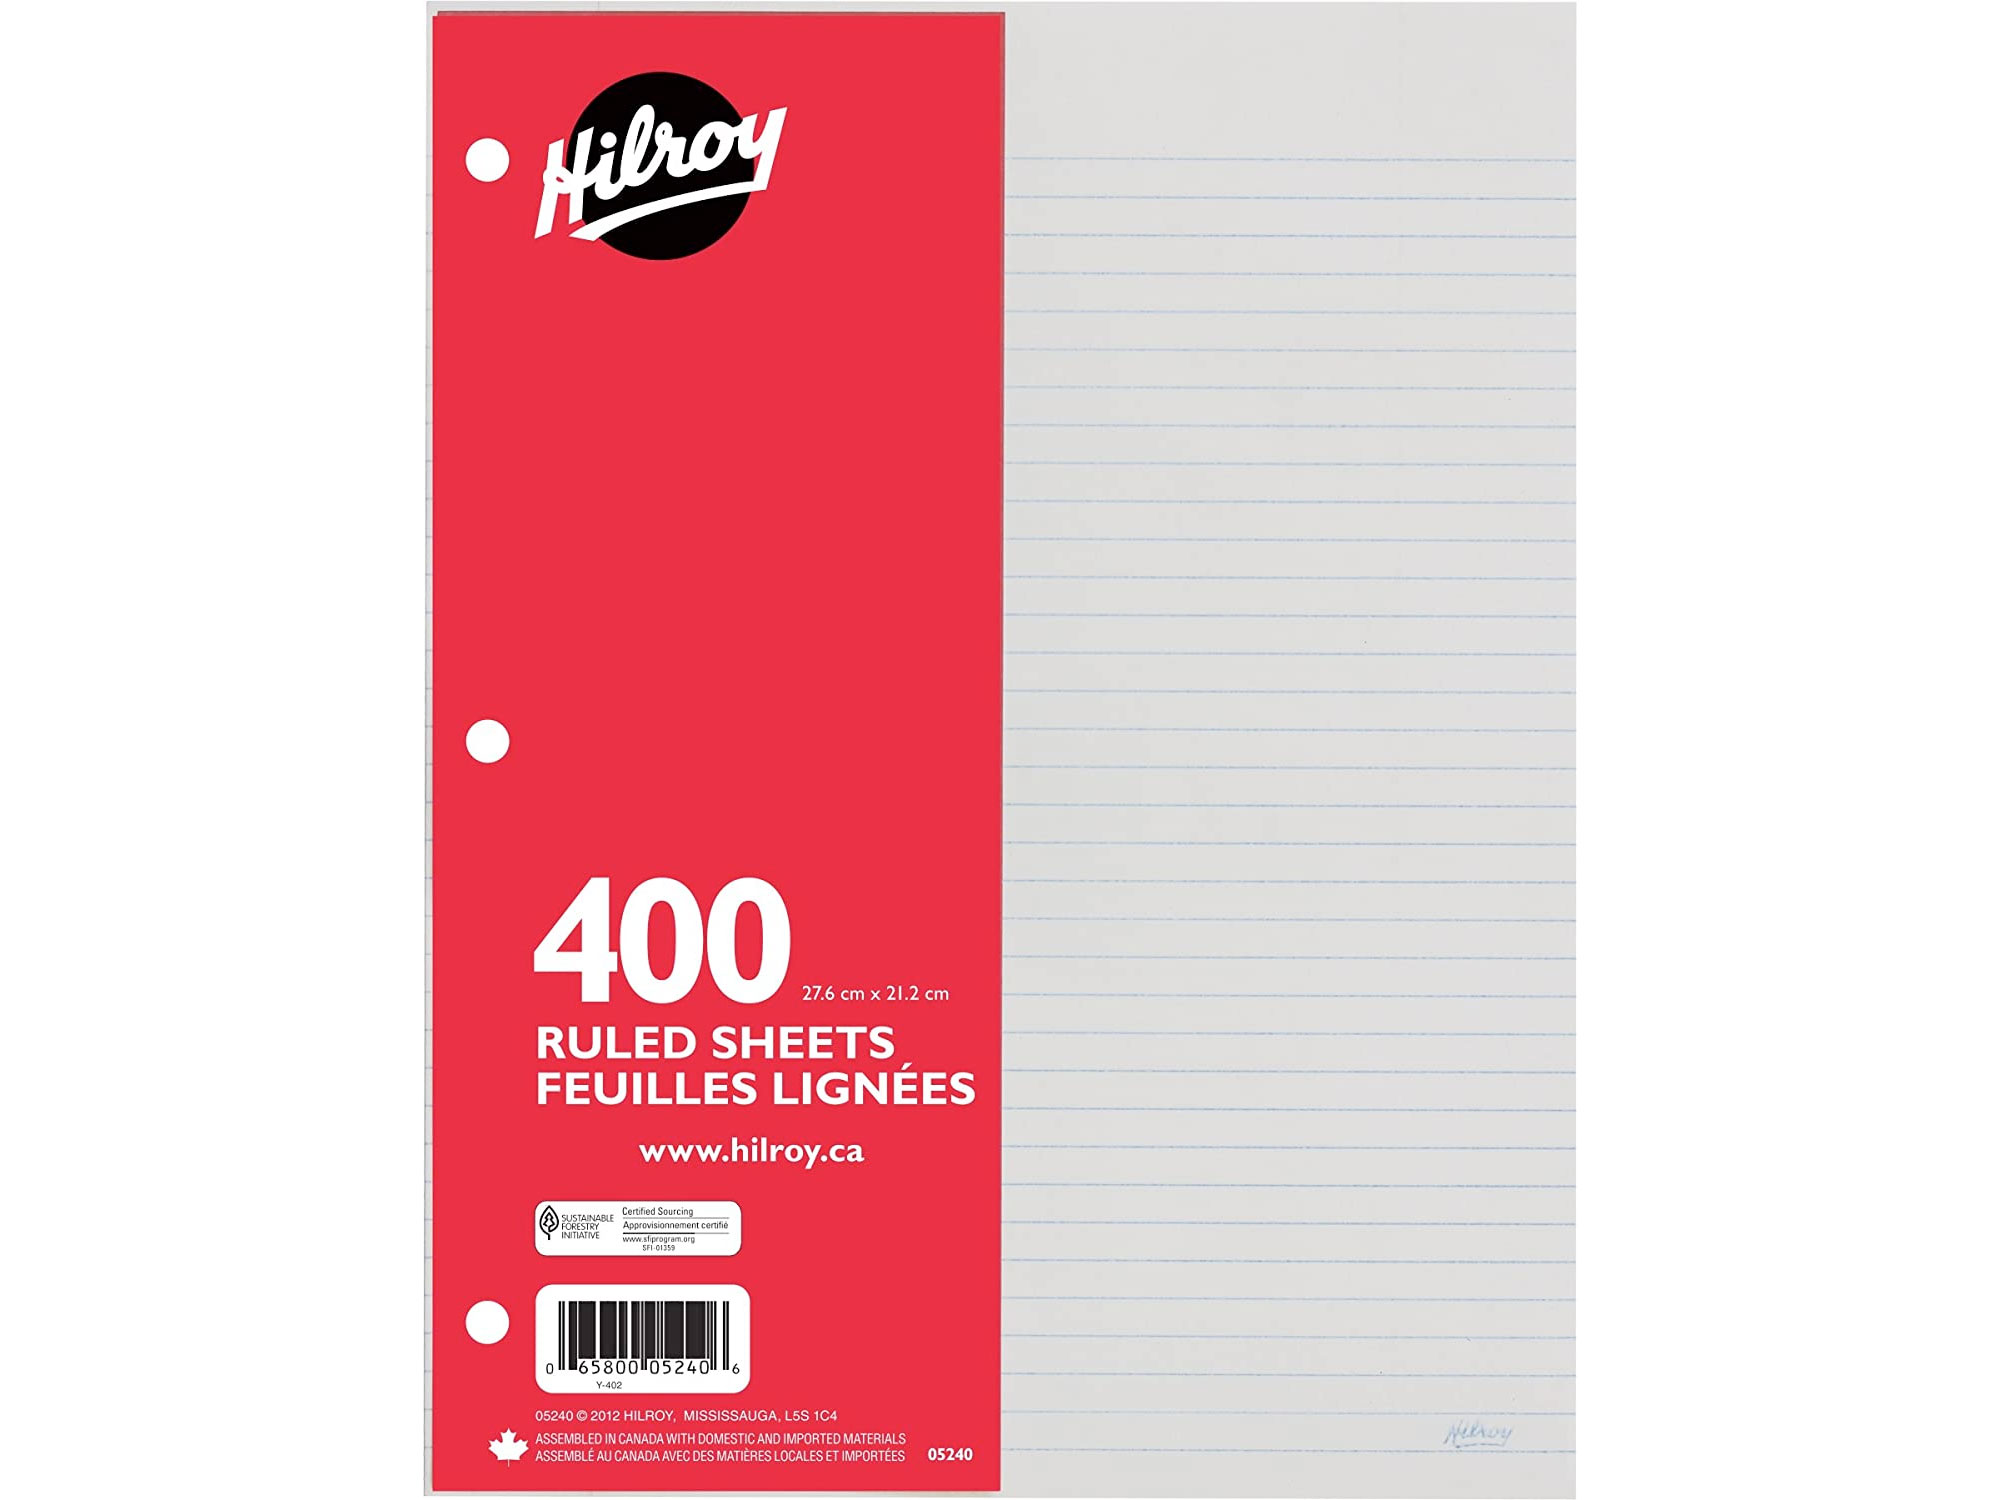 Amazon：Hilroy 3 Hole Punched Ruled Refill Paper (400 sheets)只賣$0.96